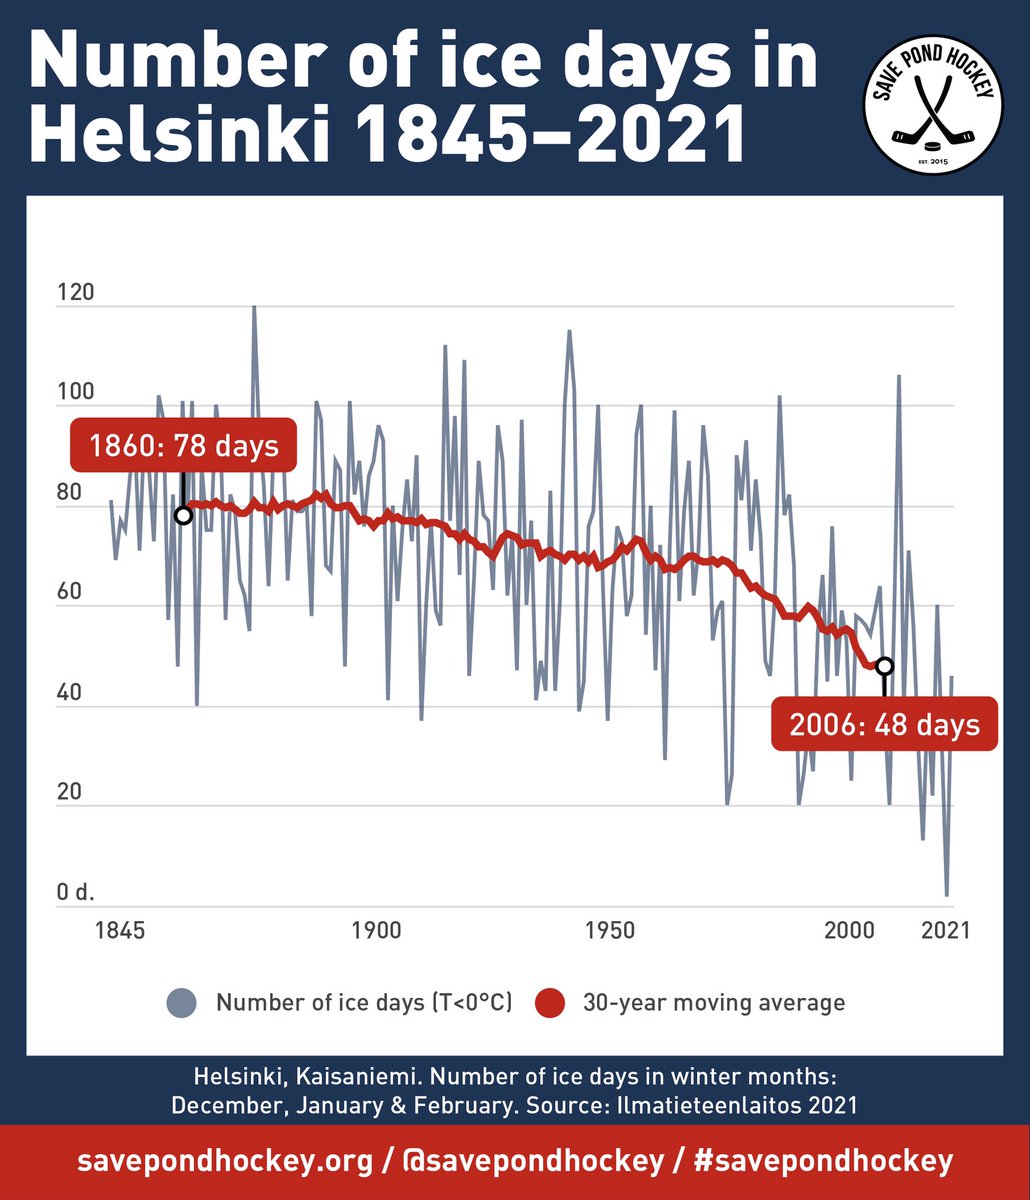 In #Helsinki, #winter 2020-21 felt traditionally long & cold. We loved it!

But on average, we now have 30 less ice days every year than we did 160 years ago. Ice days are critical for #pondhockey. And they are rapidly vanishing. #climate

Source: @meteorologit. Thx @mikarantane! https://t.co/LdVSOzkTXm